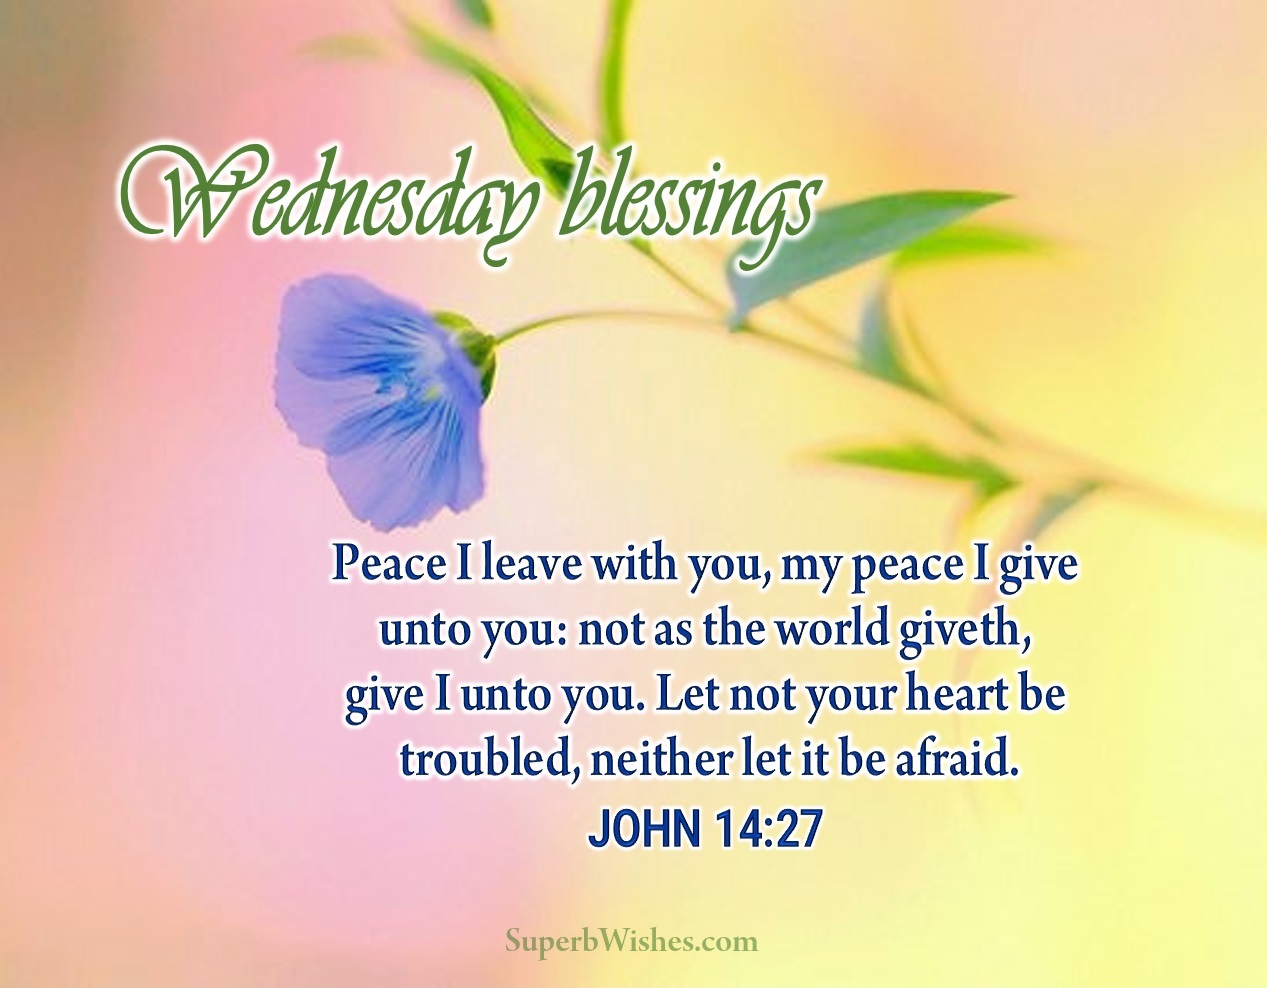 Bible verse blessed Wednesday quotes. Superbwishes.com